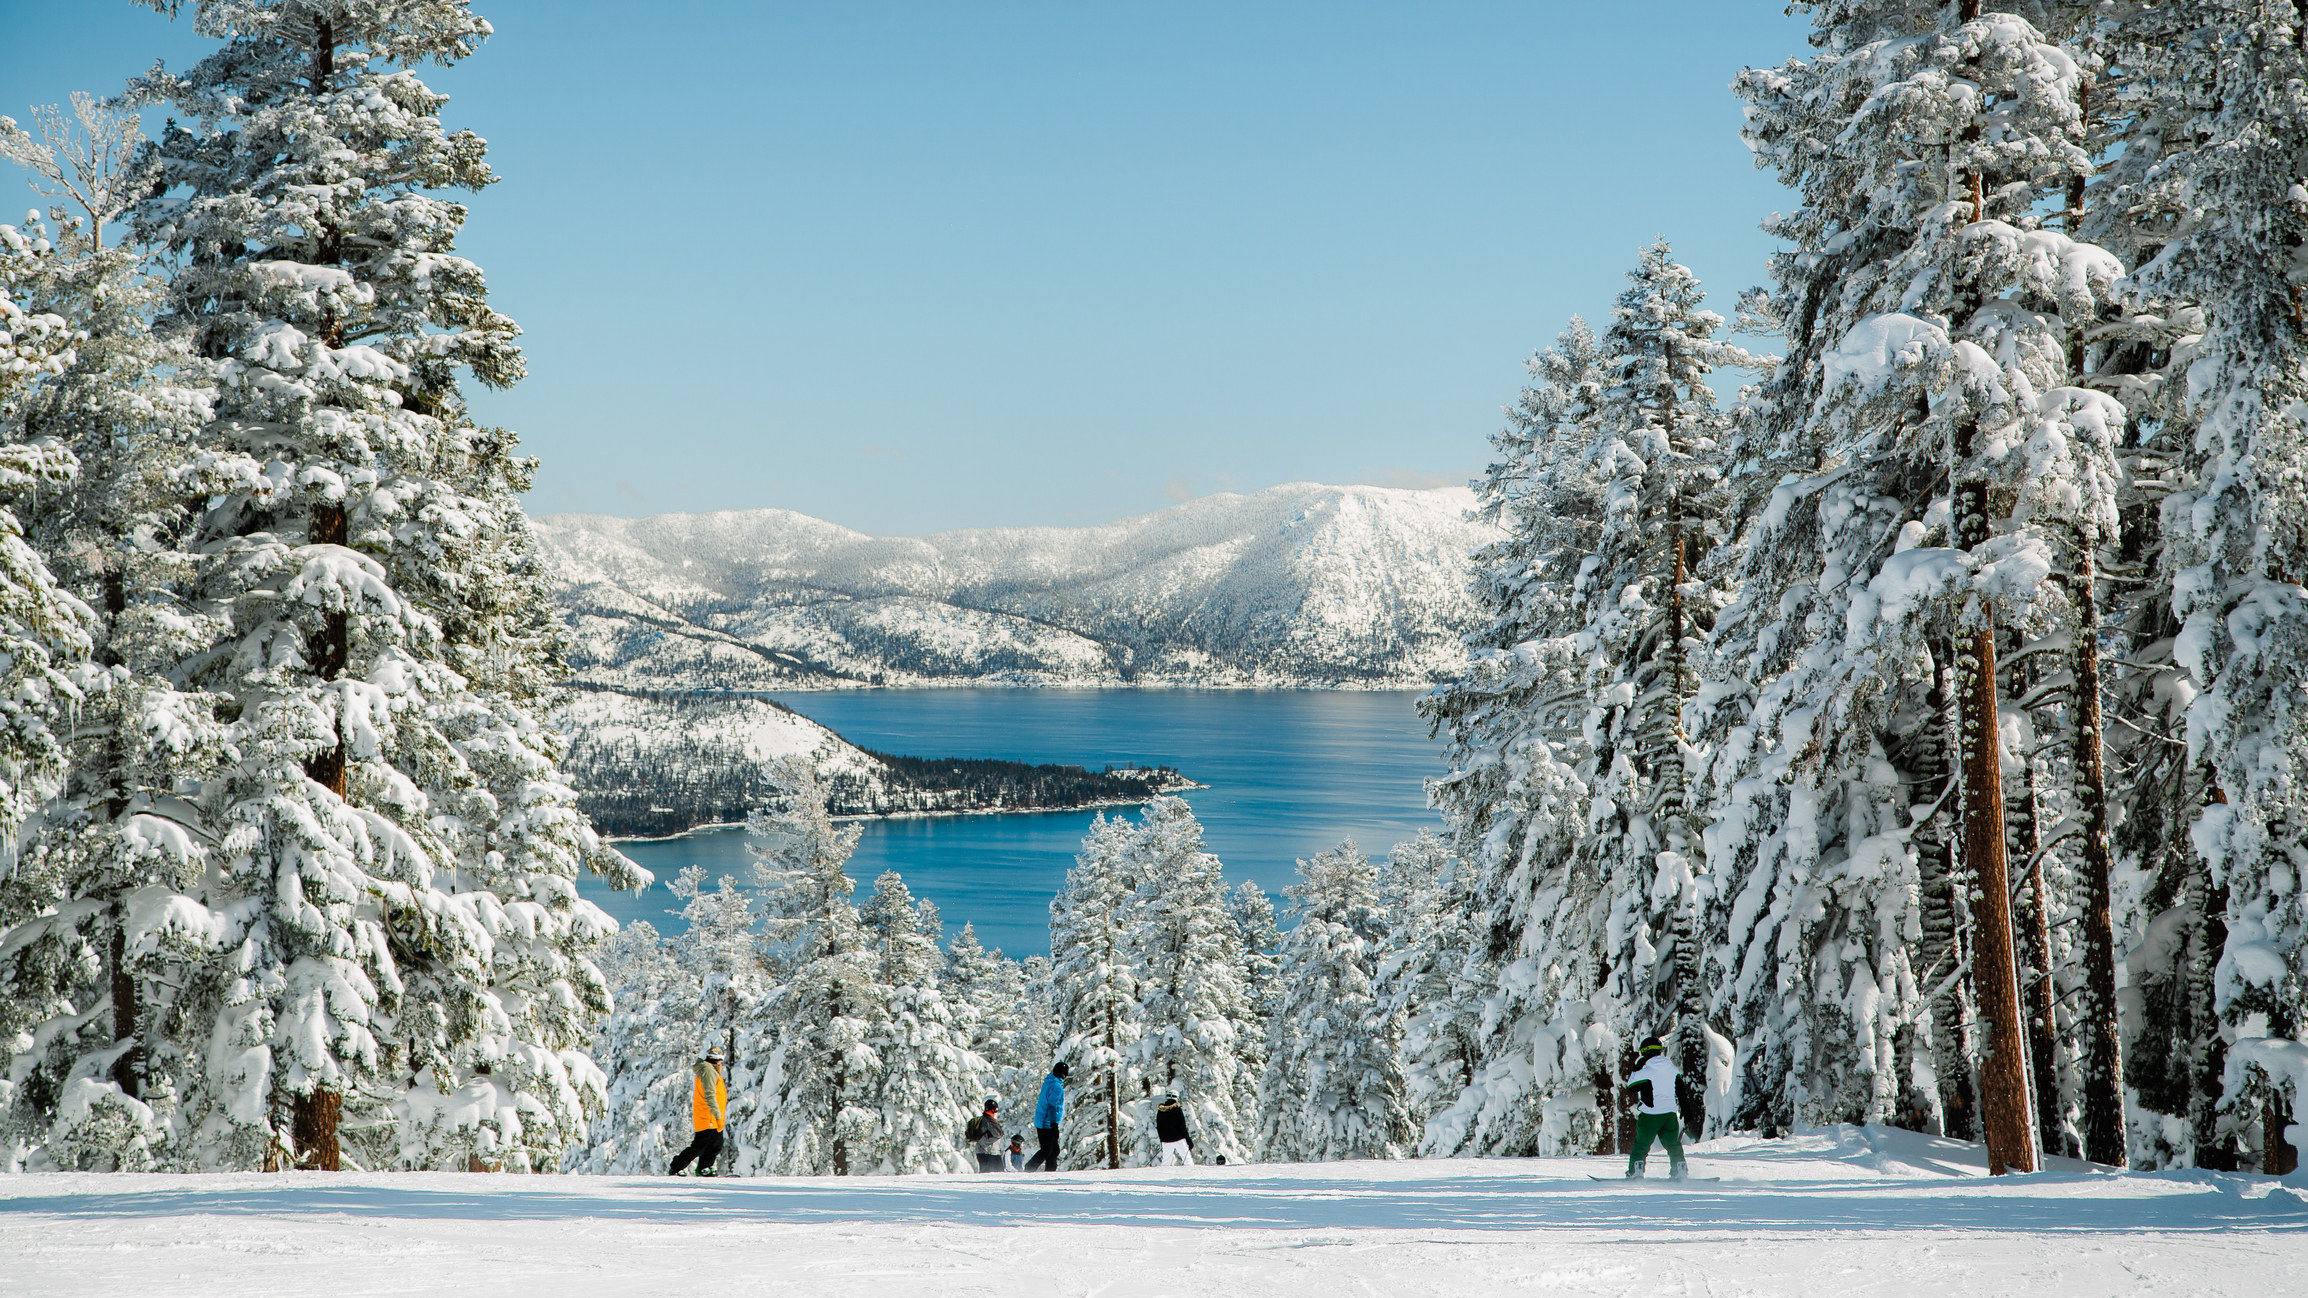 People skiing on top of a mountain with view of Lake Tahoe on a snowy winter day